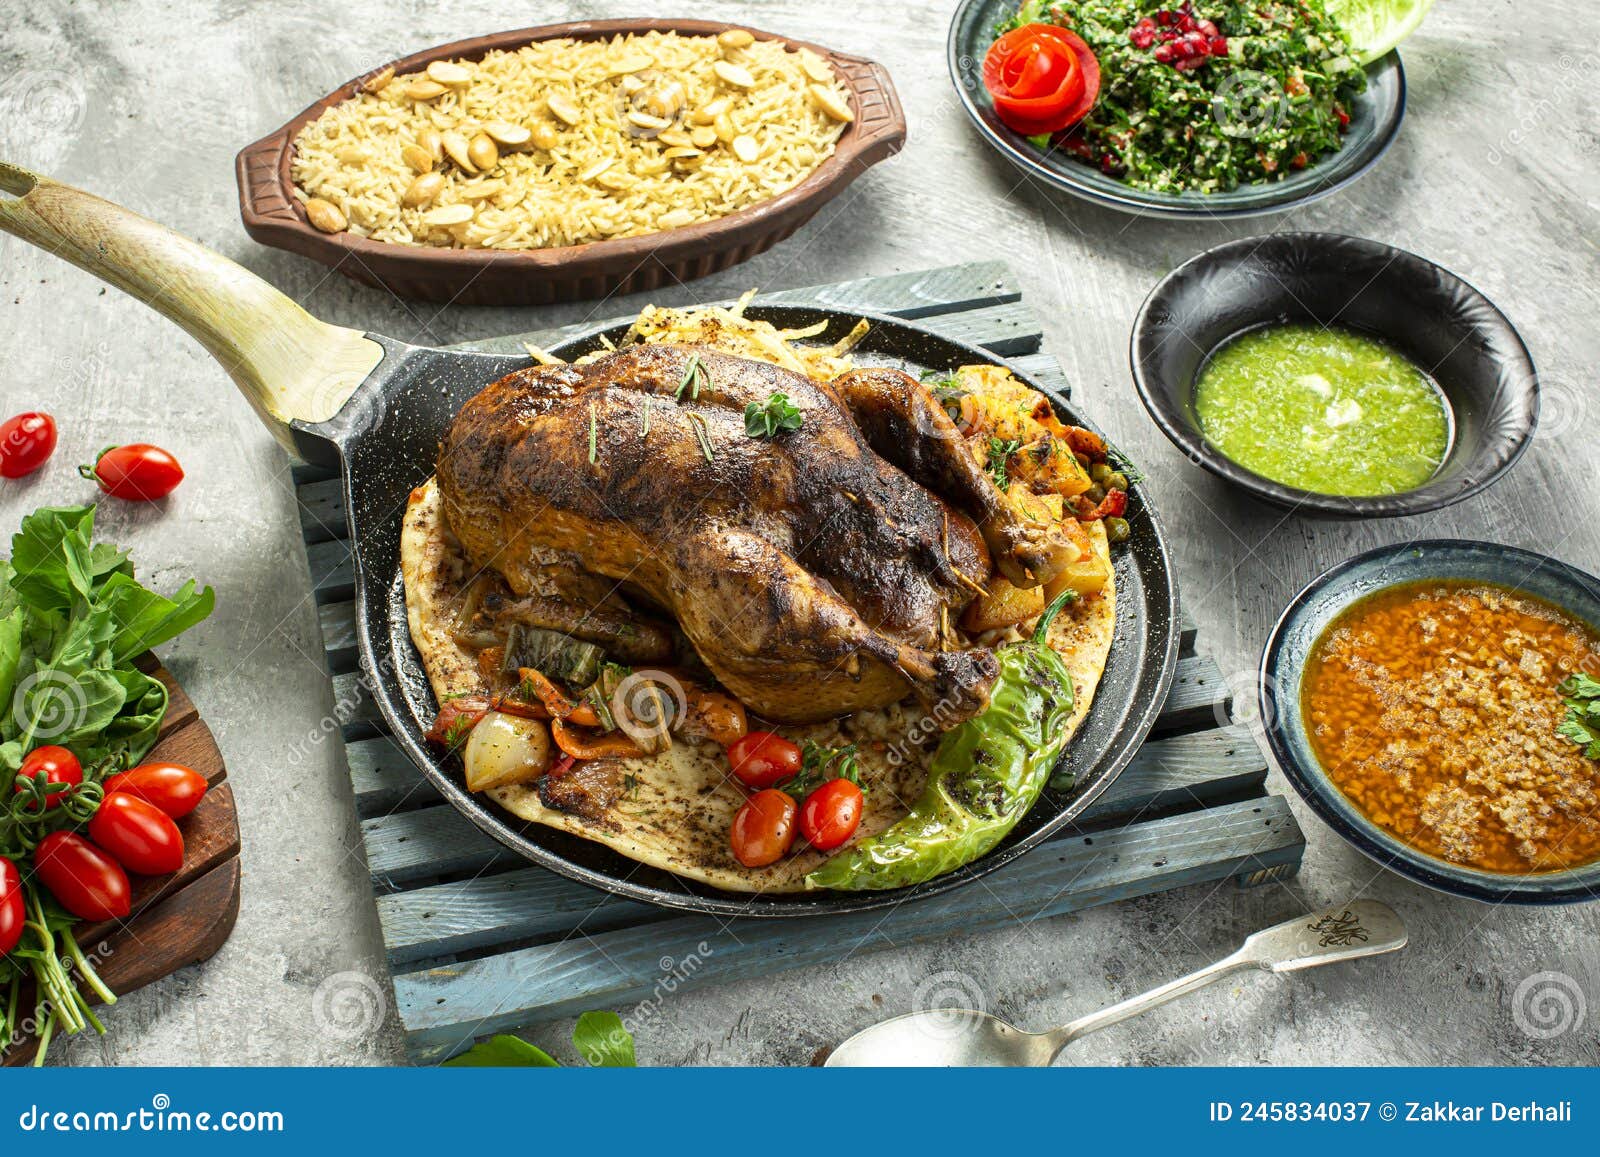 Chicken with Rice Dish and Lentil Soup.and Taboola Dish . Stock Image ...